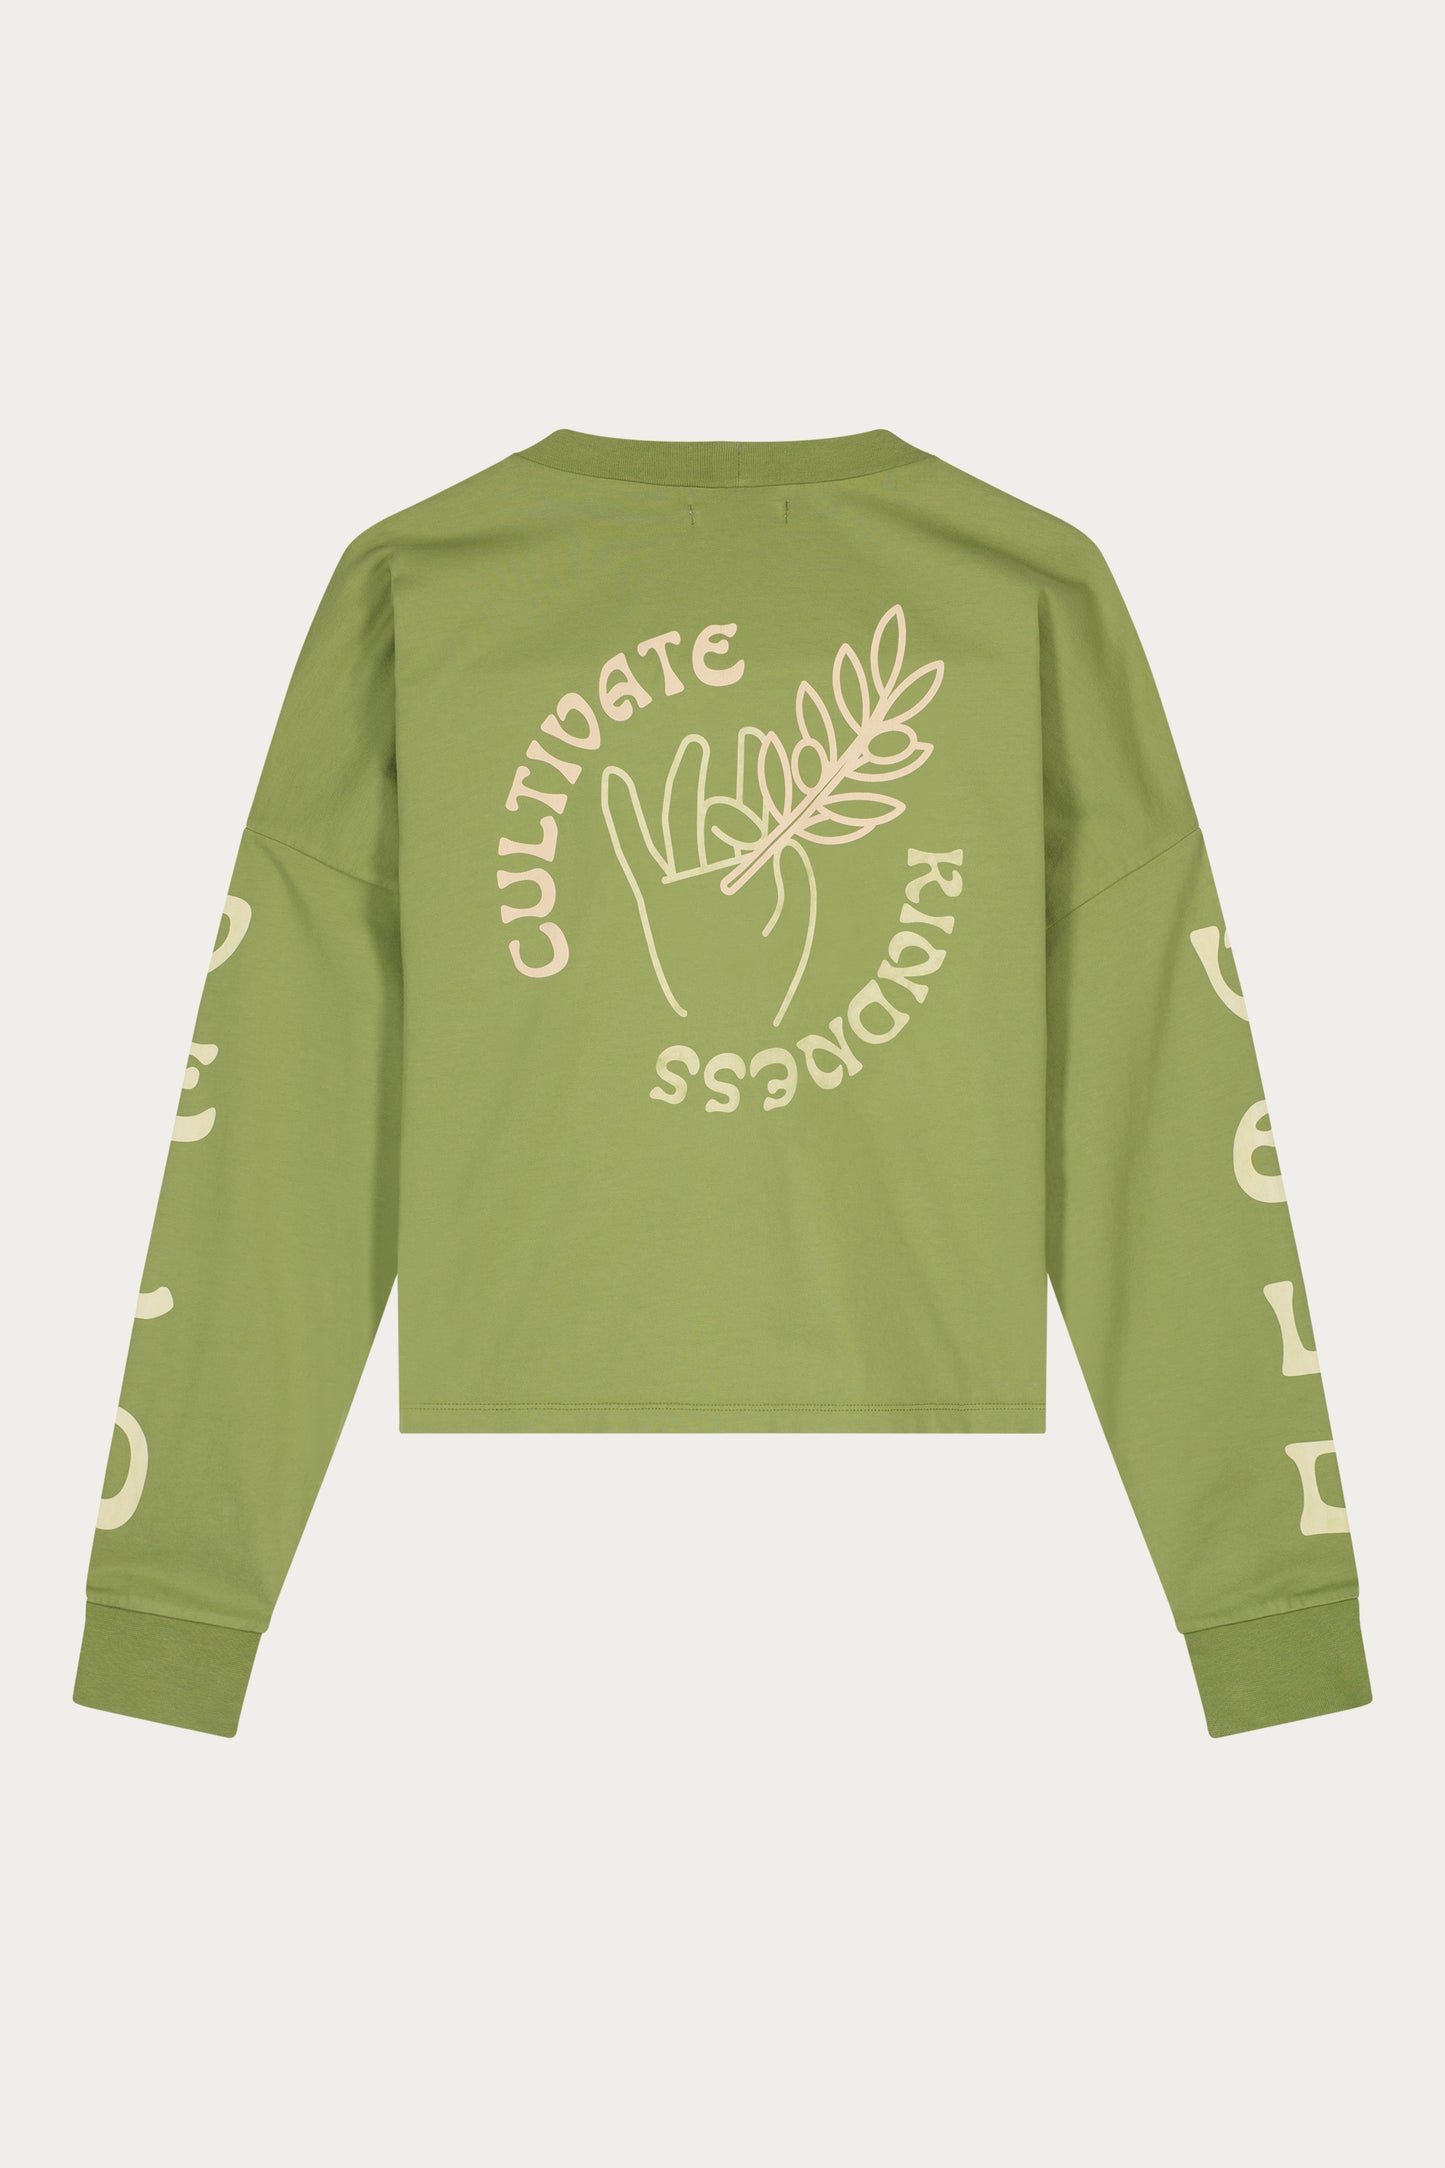 Vondel Cultivate Kindness Long Sleeve T-Shirt - Turtle Green